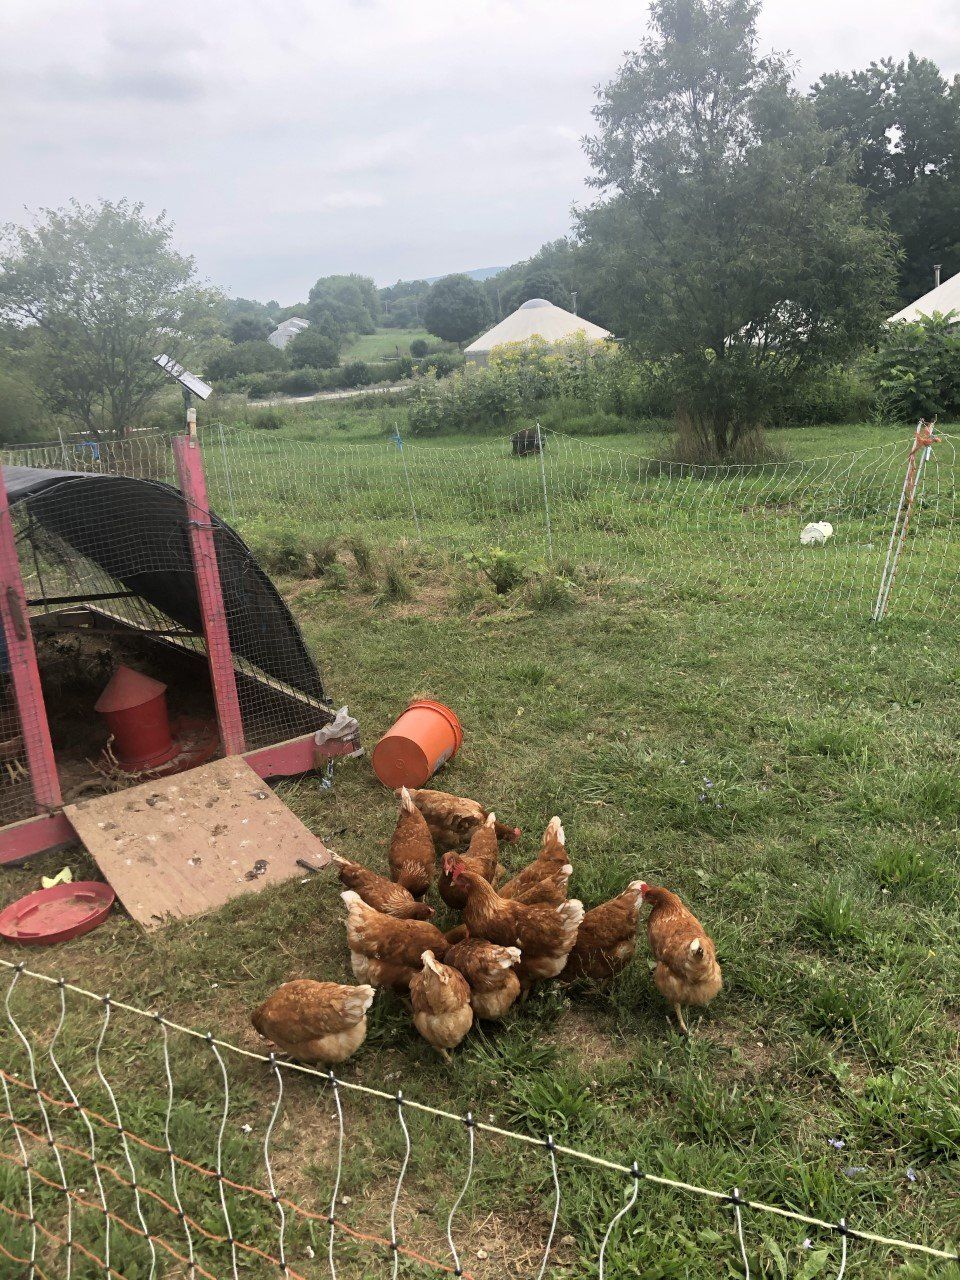 Previous Happening: Farm Happenings for August 18, 2020